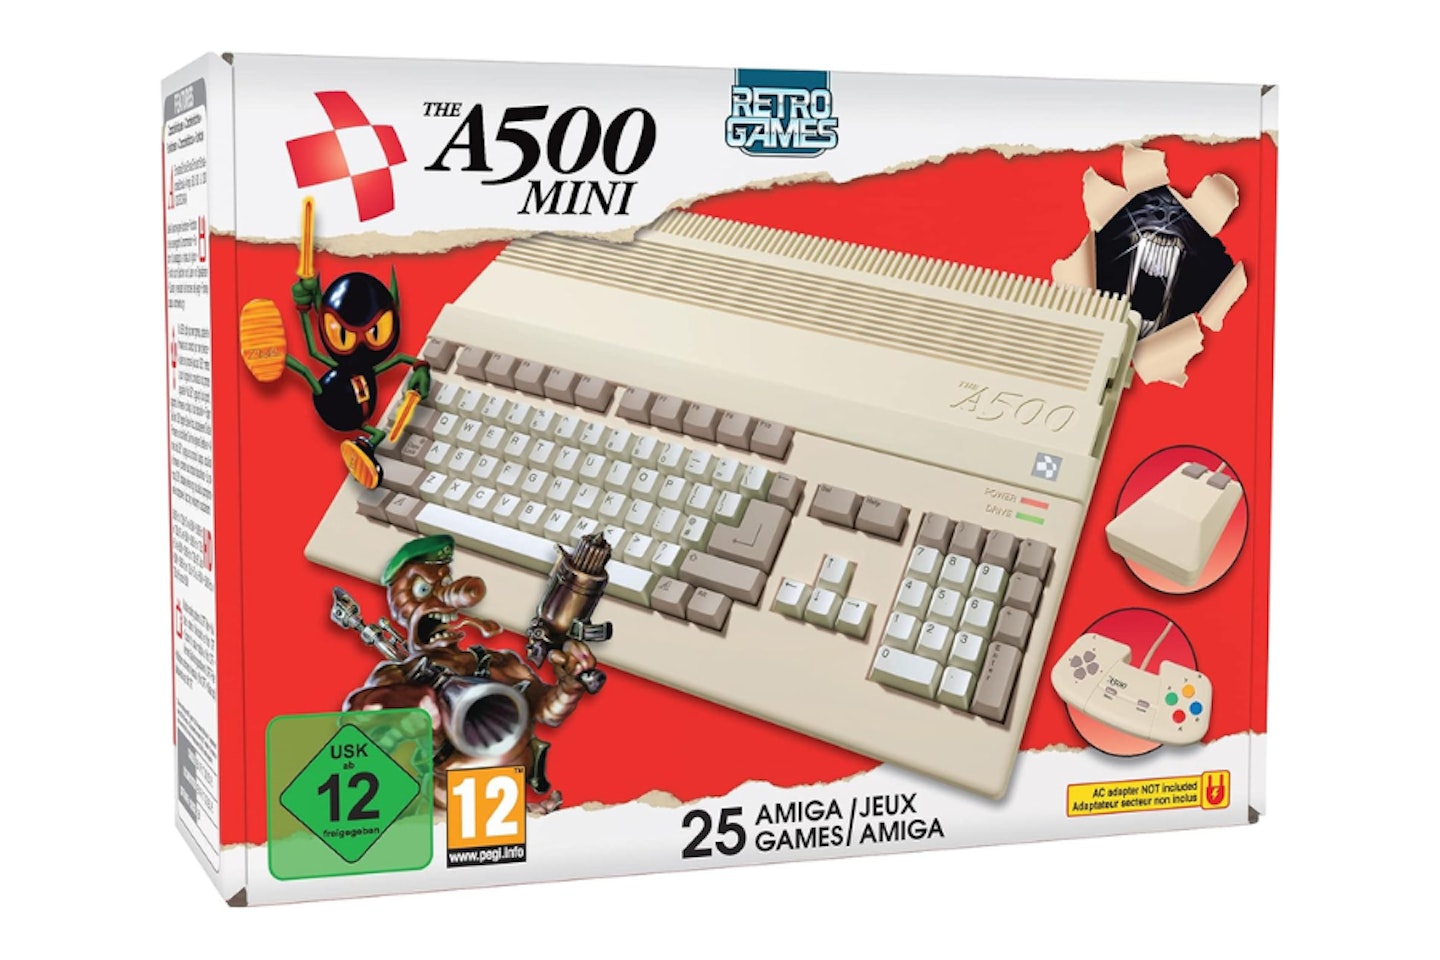 Amiga A500 Mini  - an example of the best retro game console